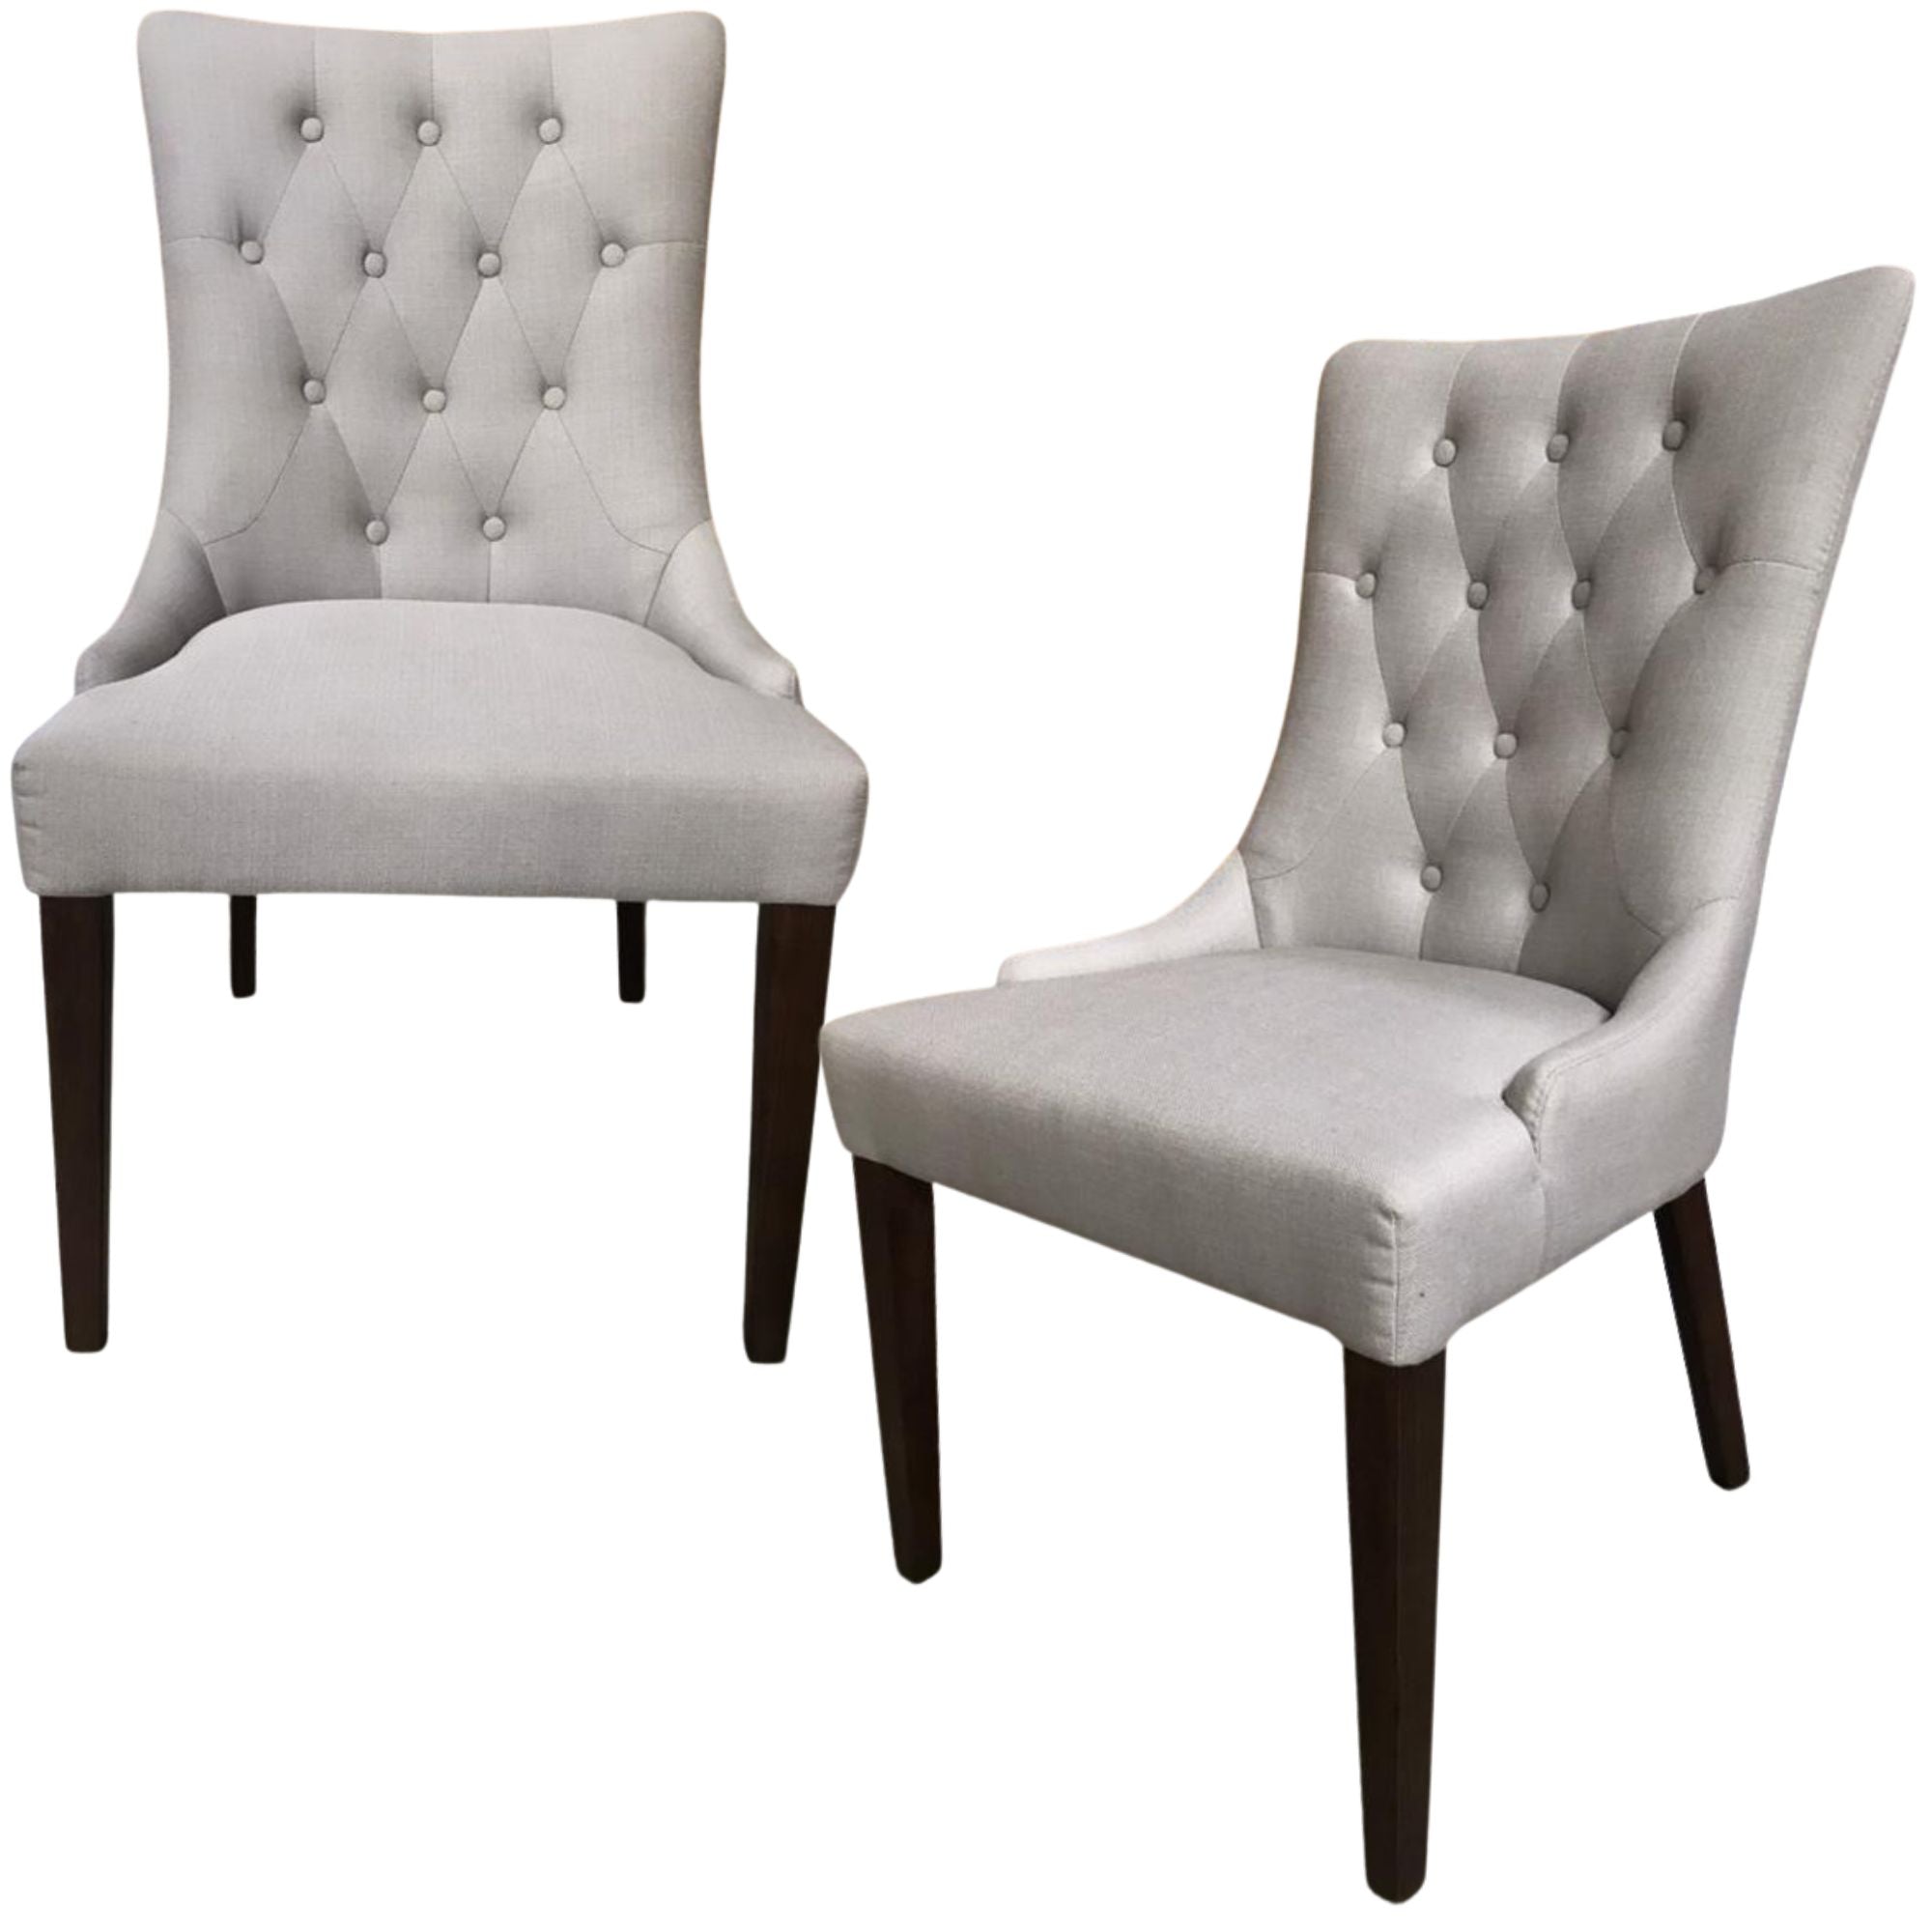 Set of 2 Fabric Dining Chair French Provincial Solid Timber Wood